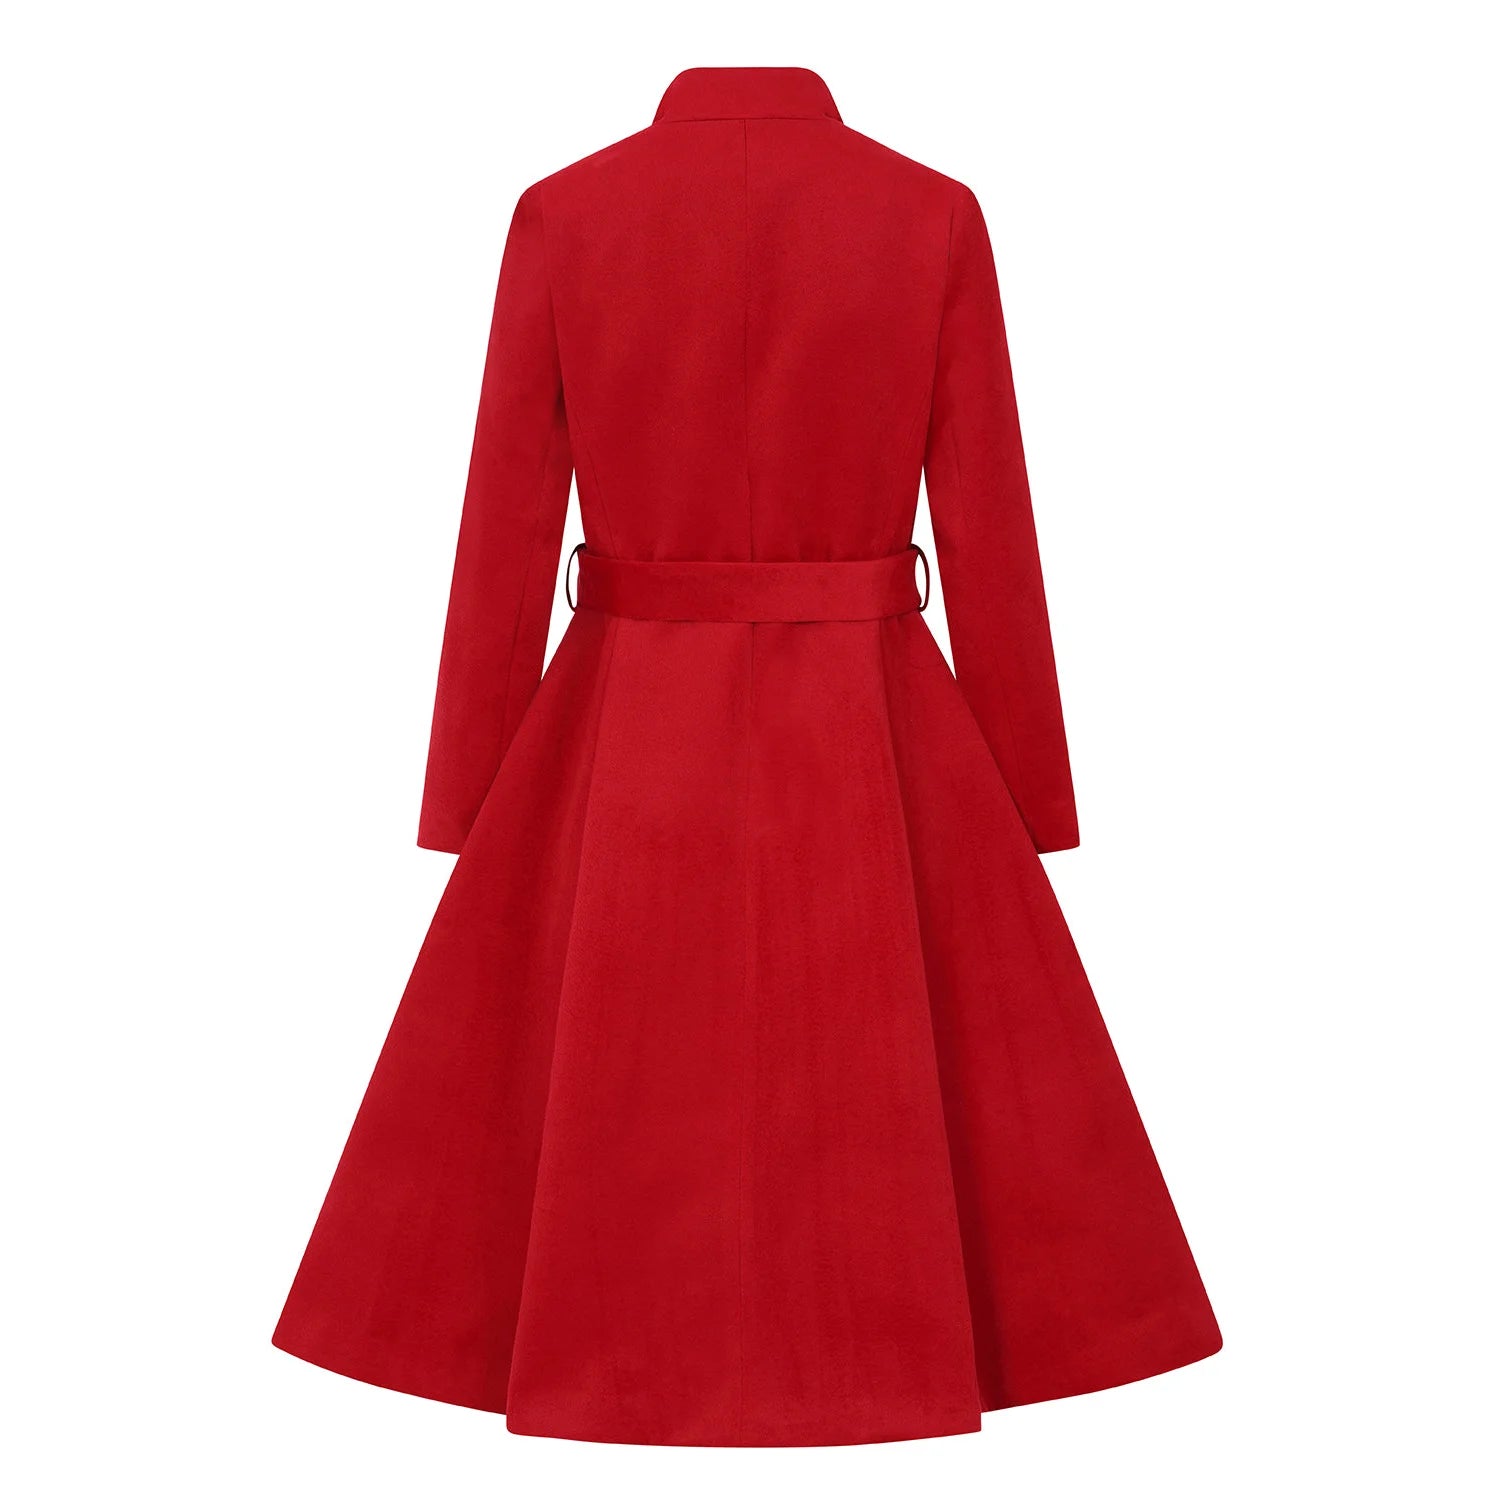 Red Vintage Inspired Classic Swing Coat